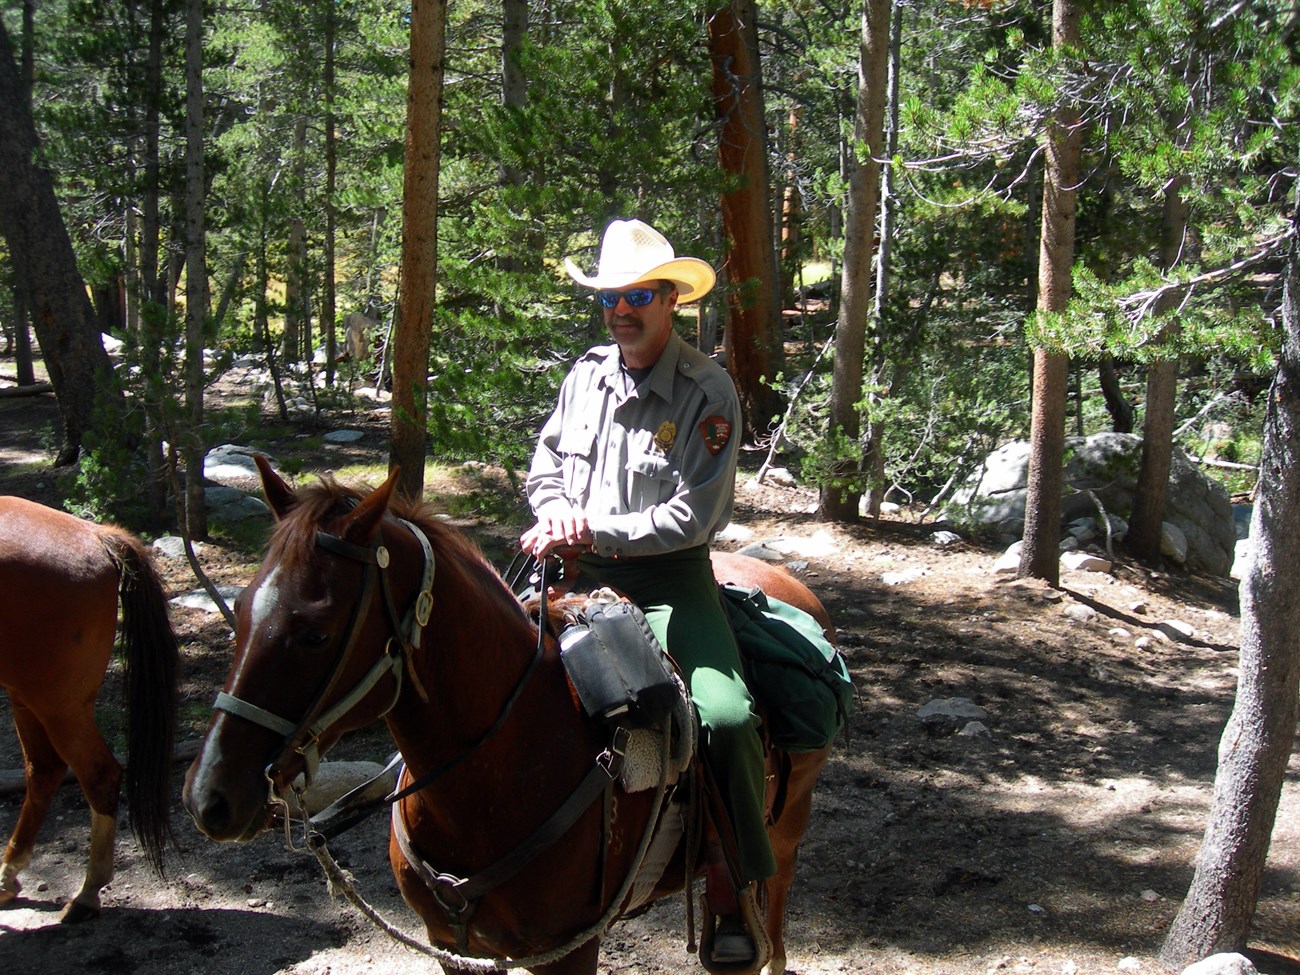 JD Swed on horseback in a wooded area